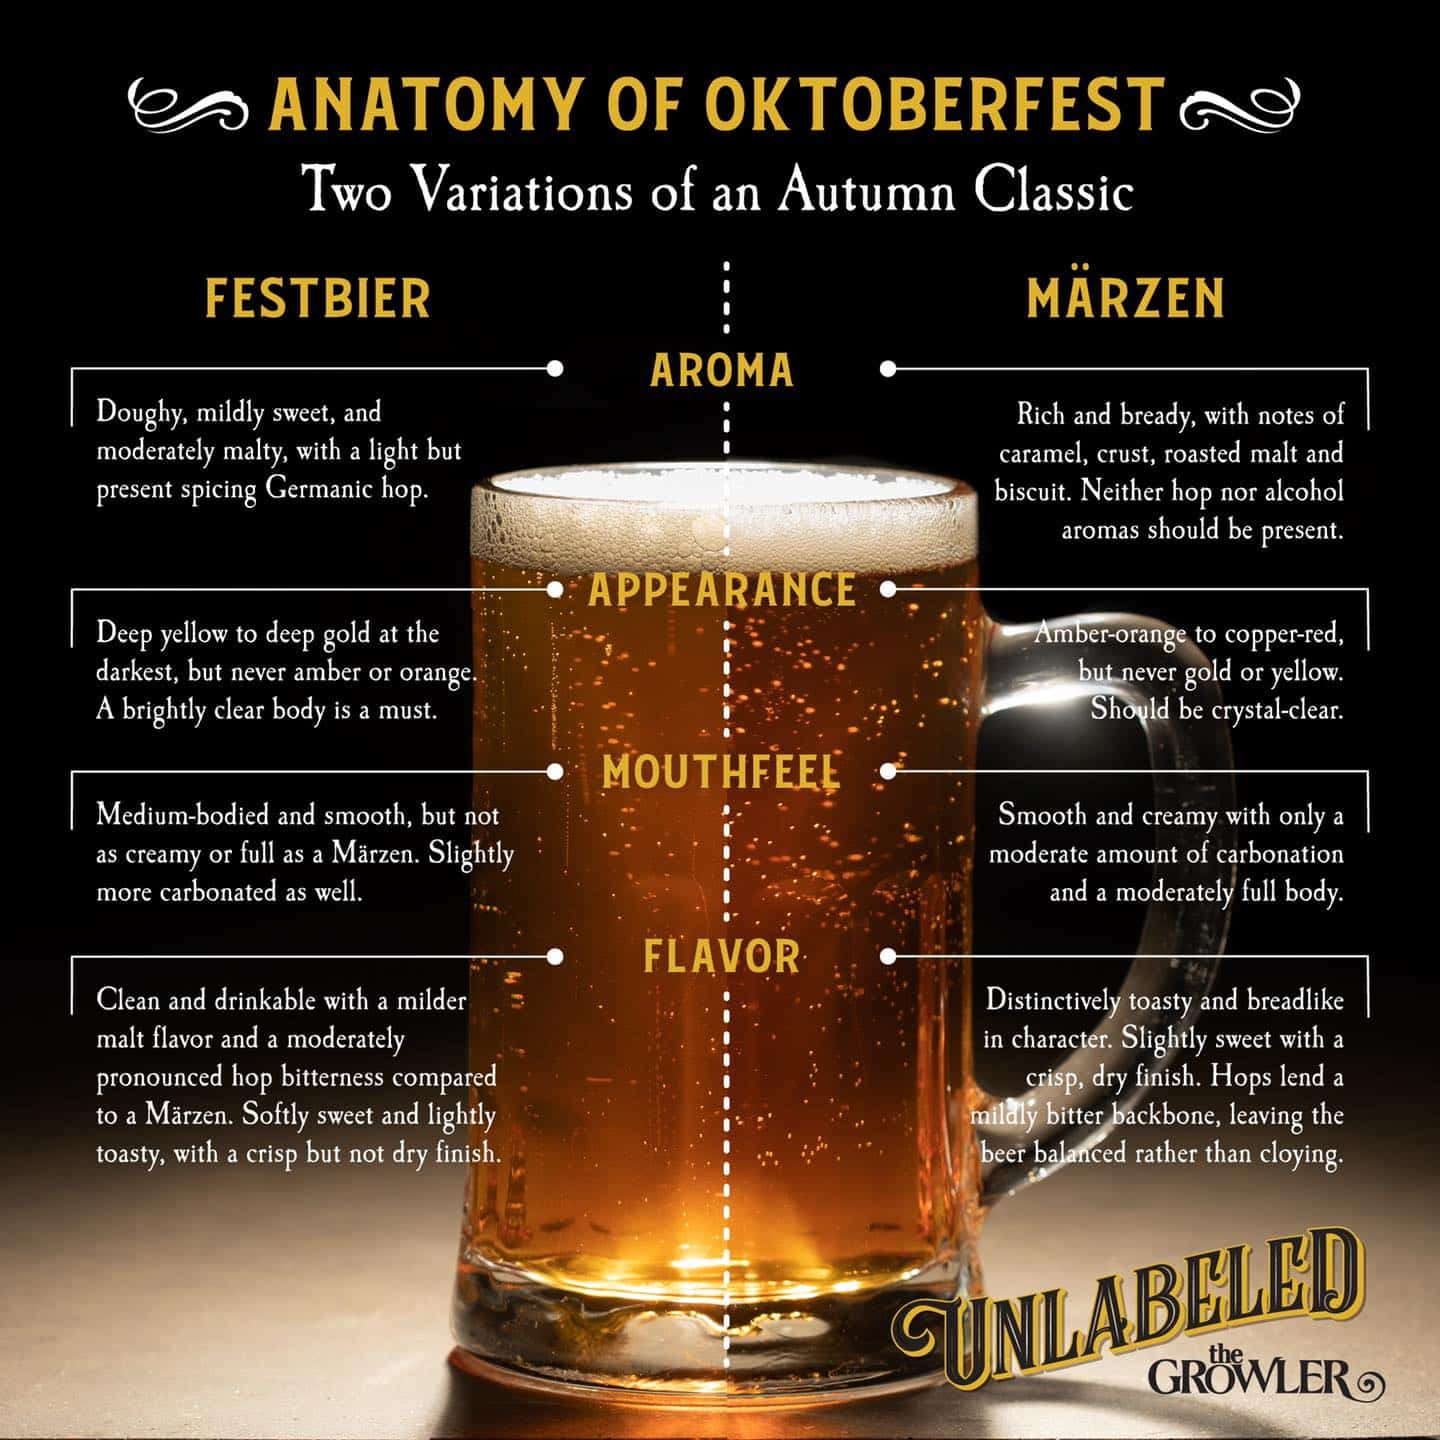 One of the most iconic beer events in the world – Oktoberfest kicked off last Sa